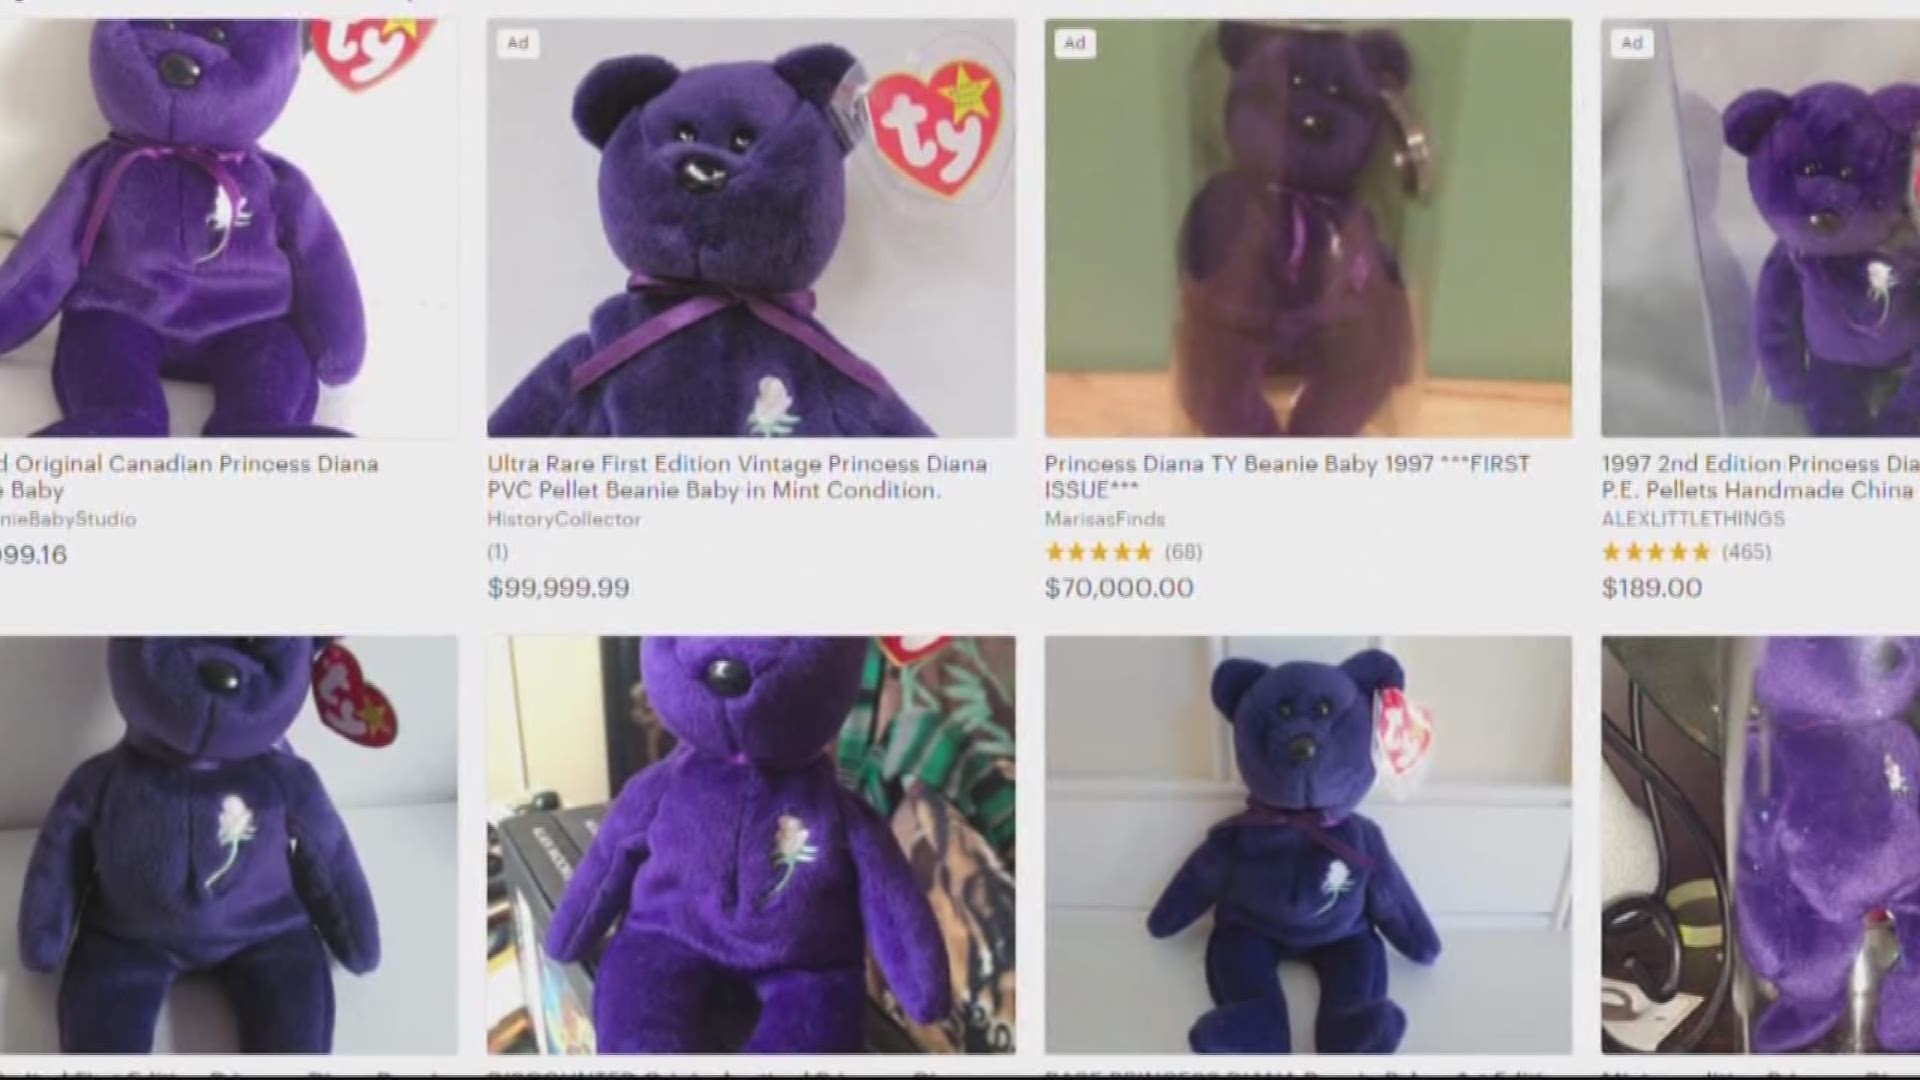 sell my ty beanie babies